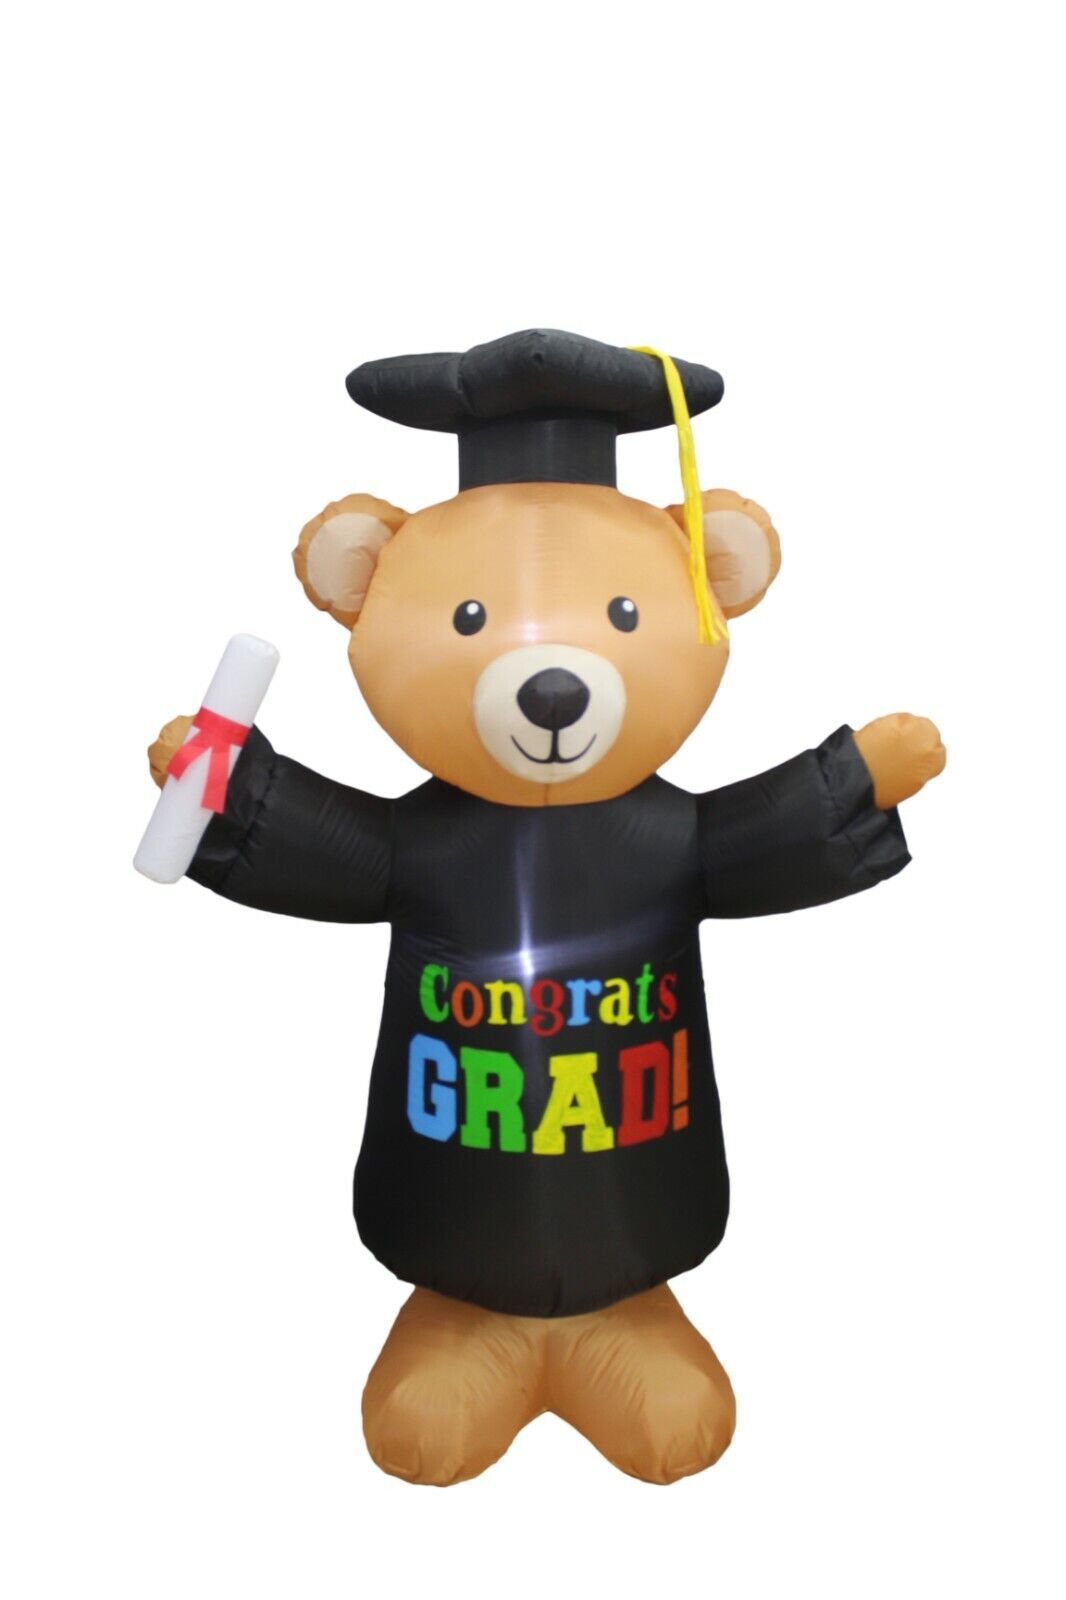 USED 6 Foot Inflatable Graduation Teddy Bear with Cap Gown Diploma Decoration